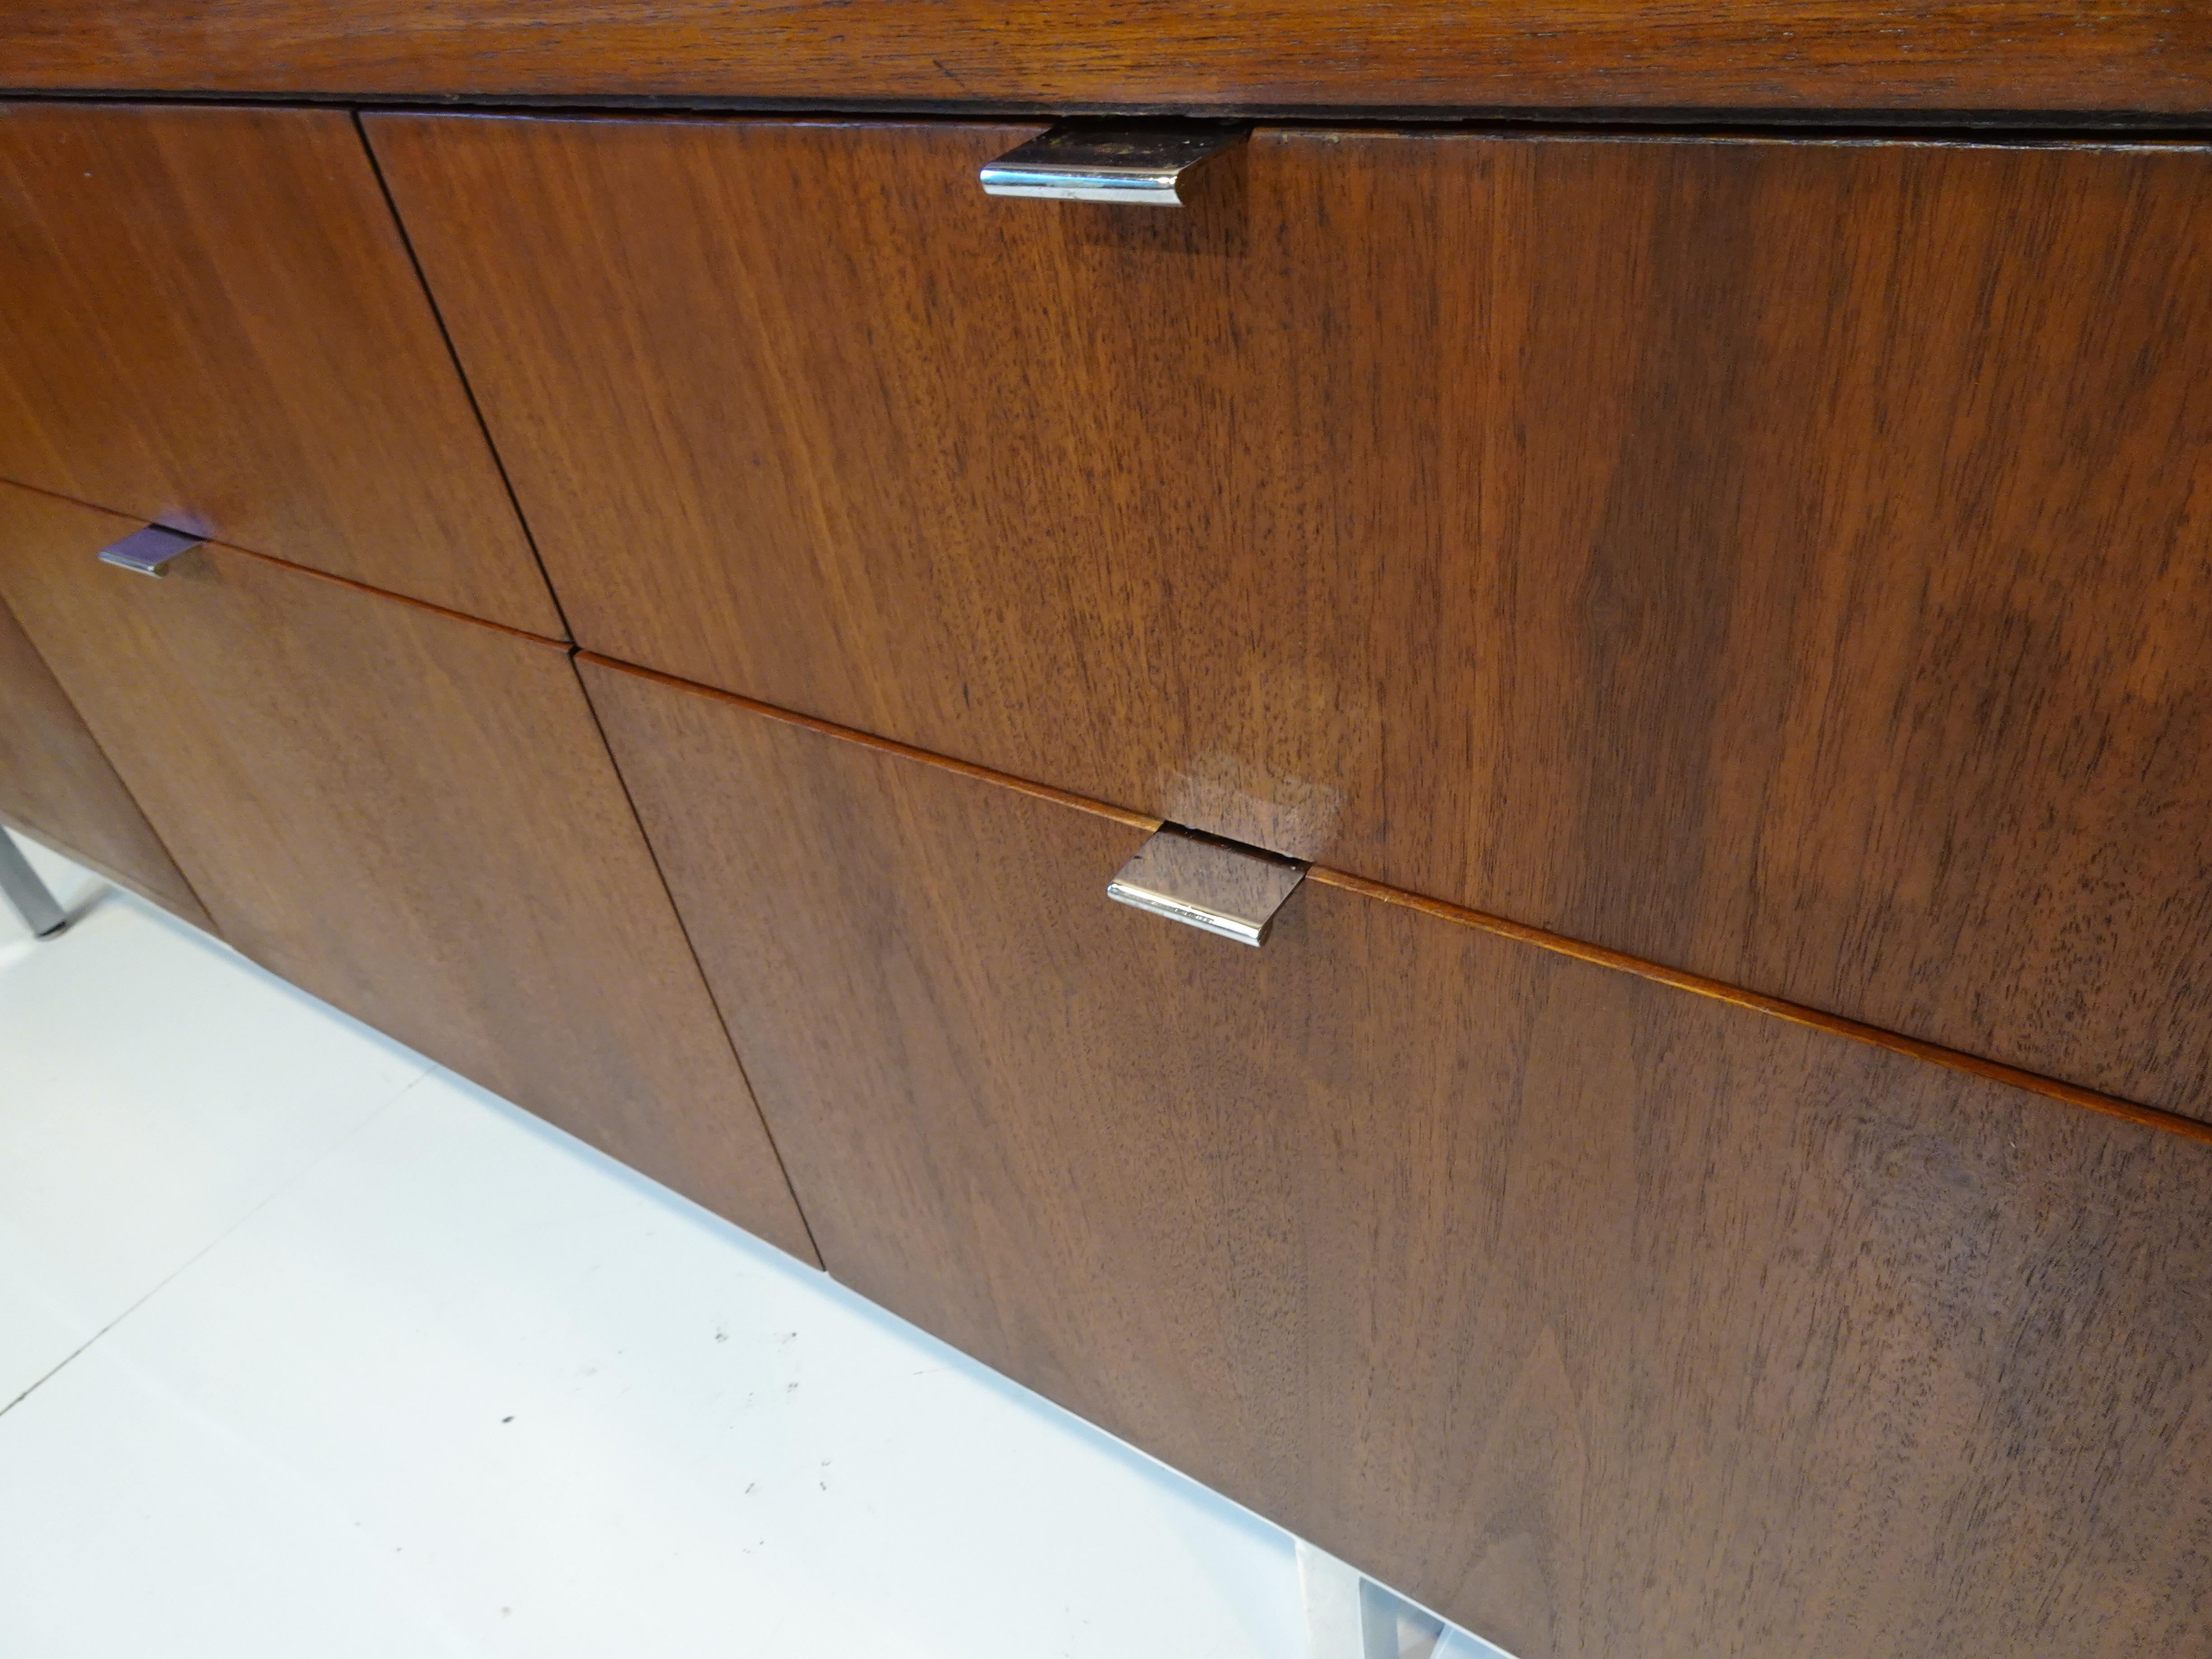 Stow Davis Walnut Credenza in the Style of Knoll 1